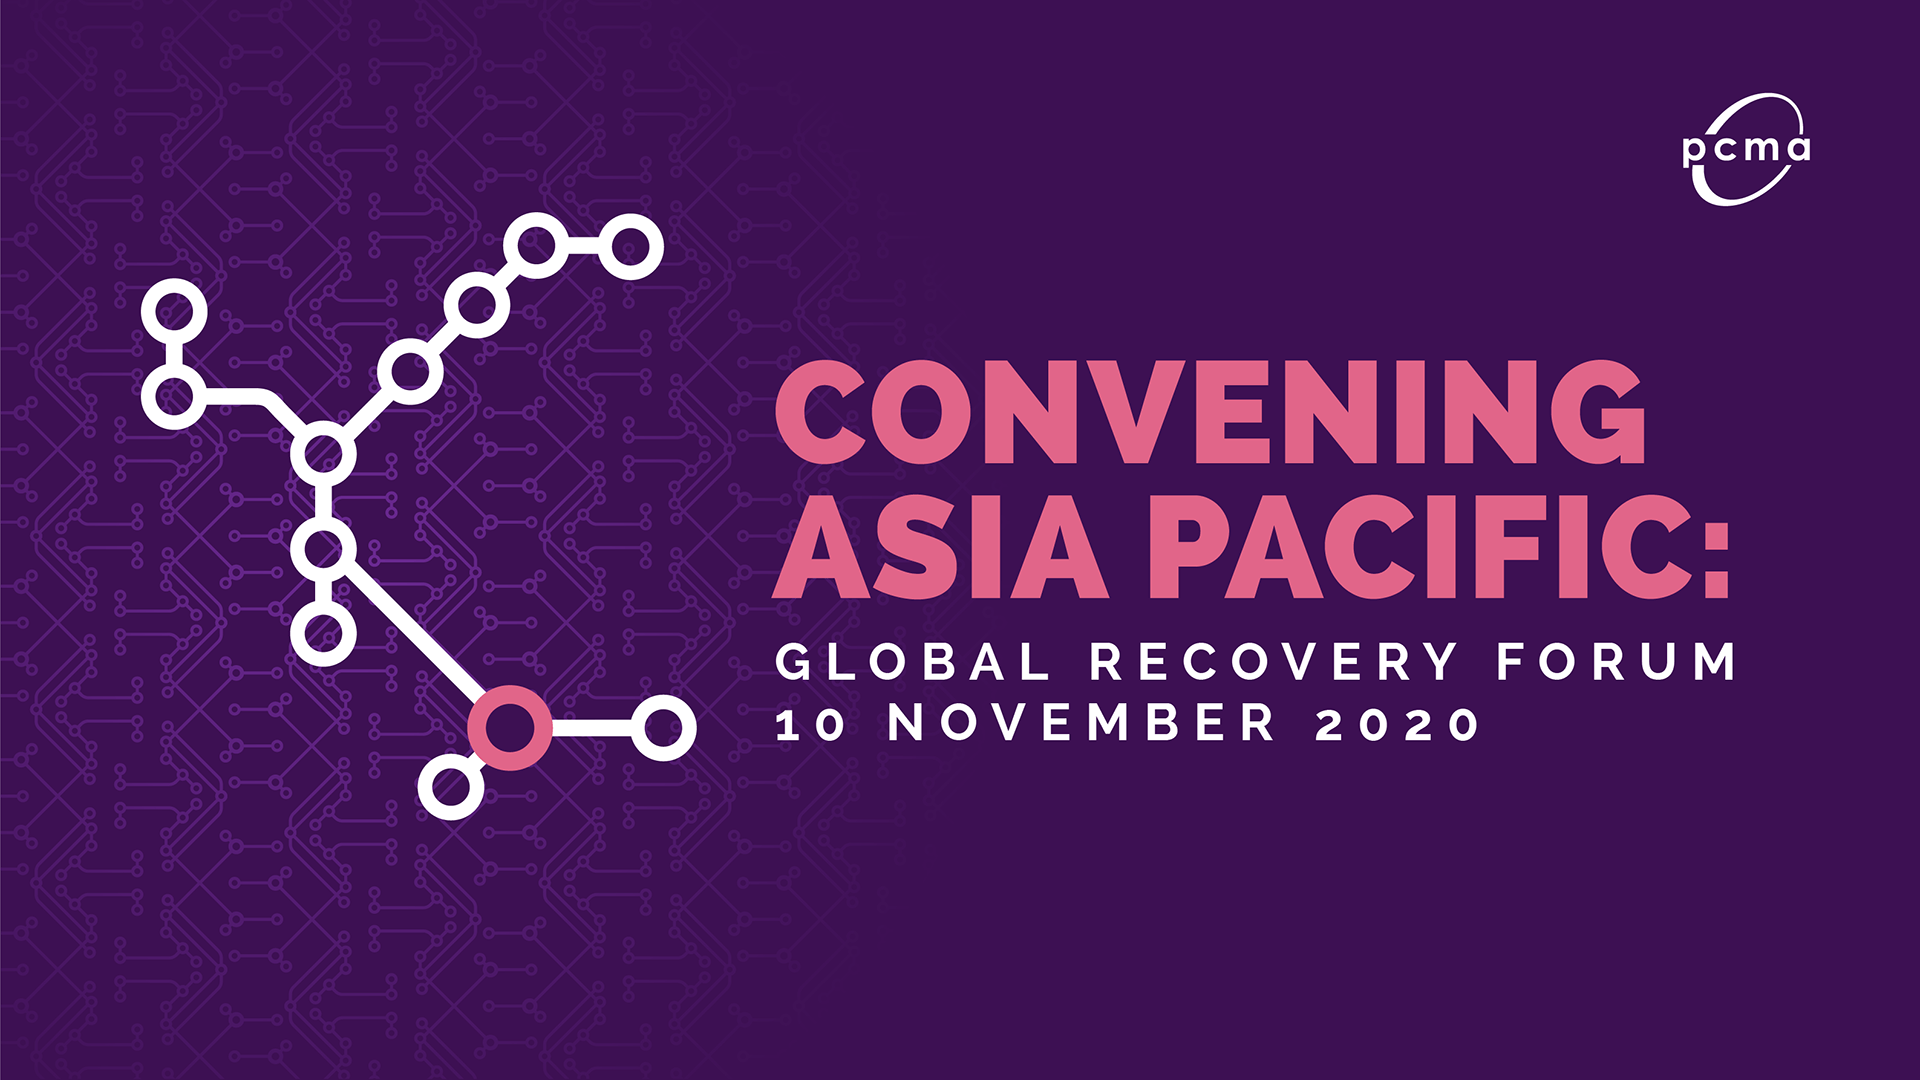 Convening Asia Pacific: The Global Recovery Forum